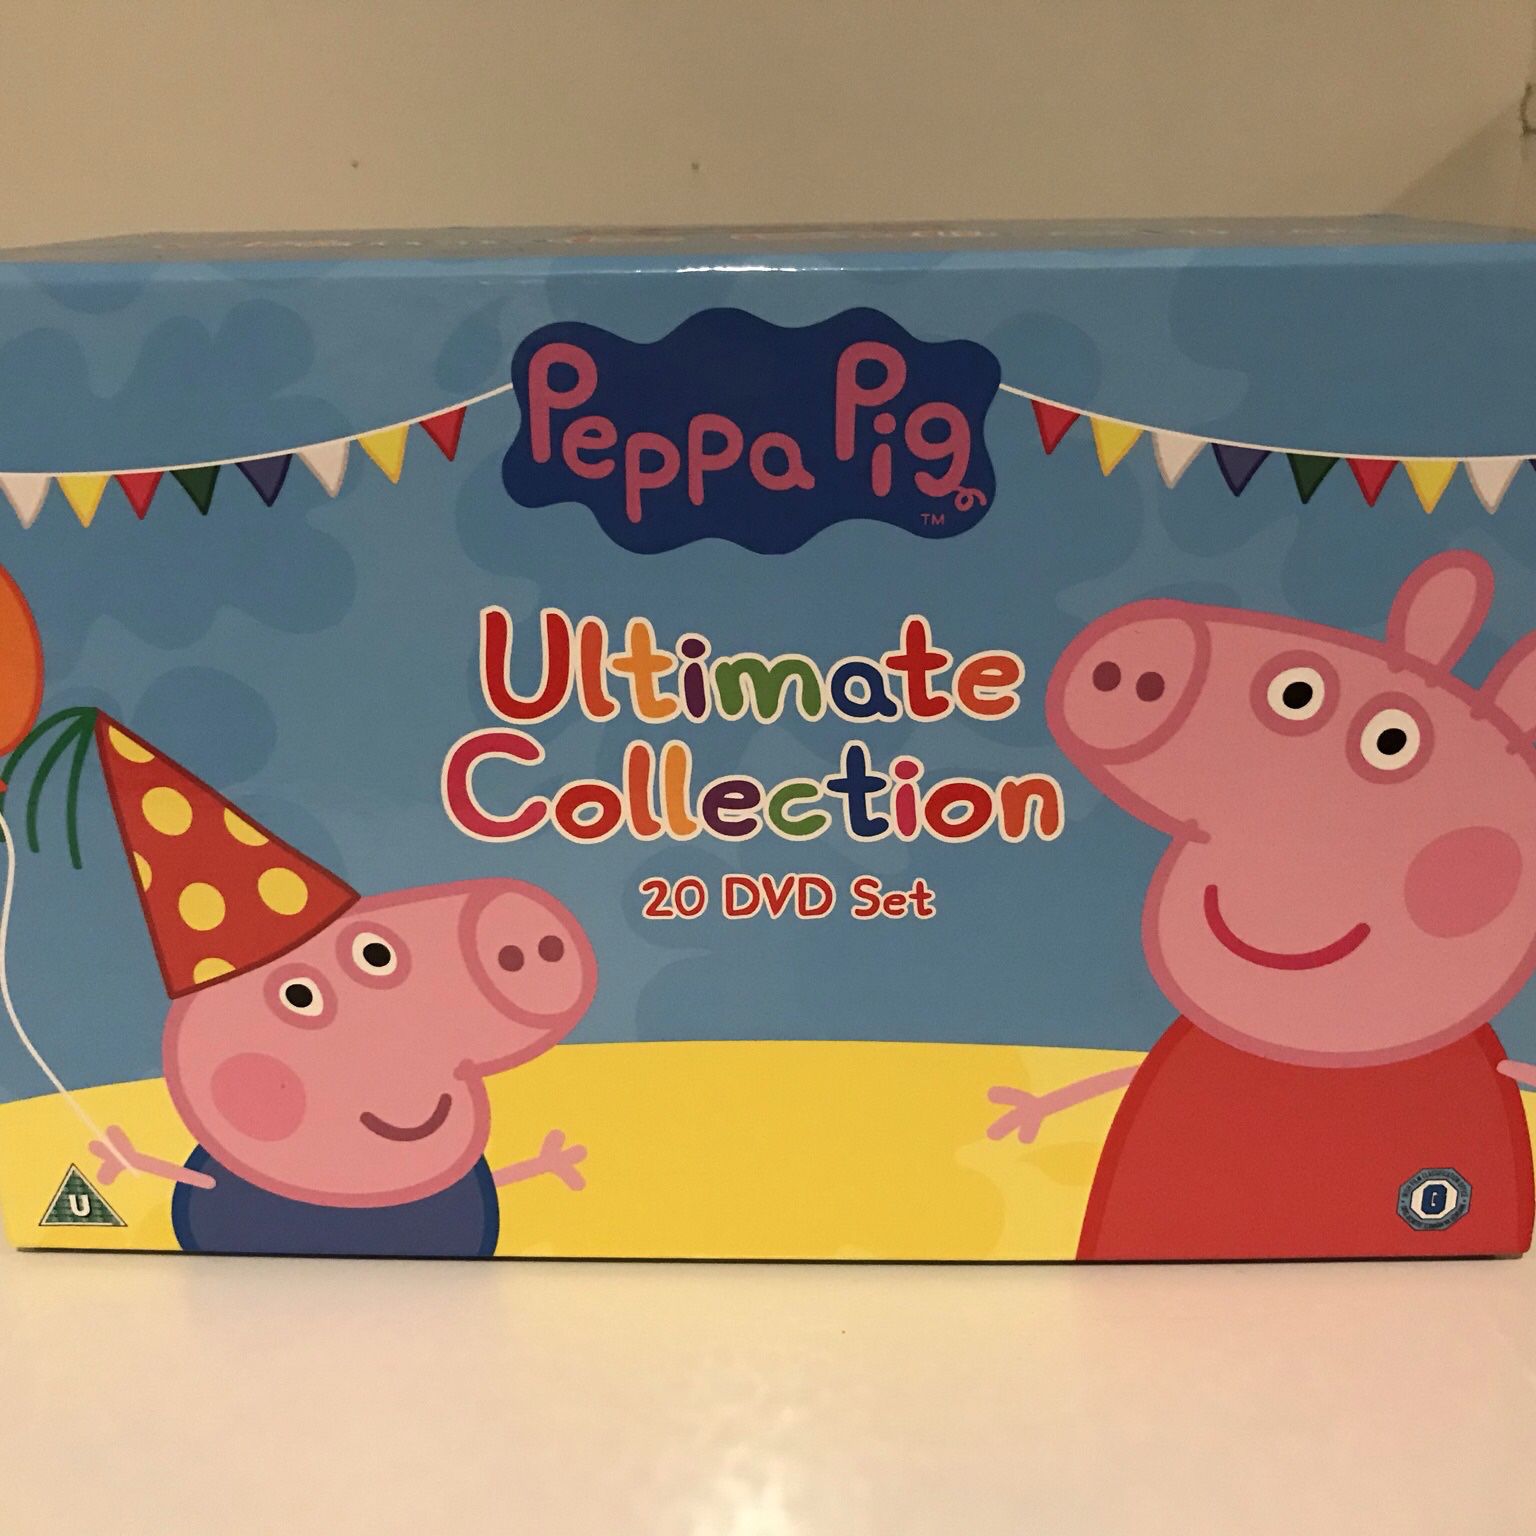 Peppa Pig Ultimate Collection